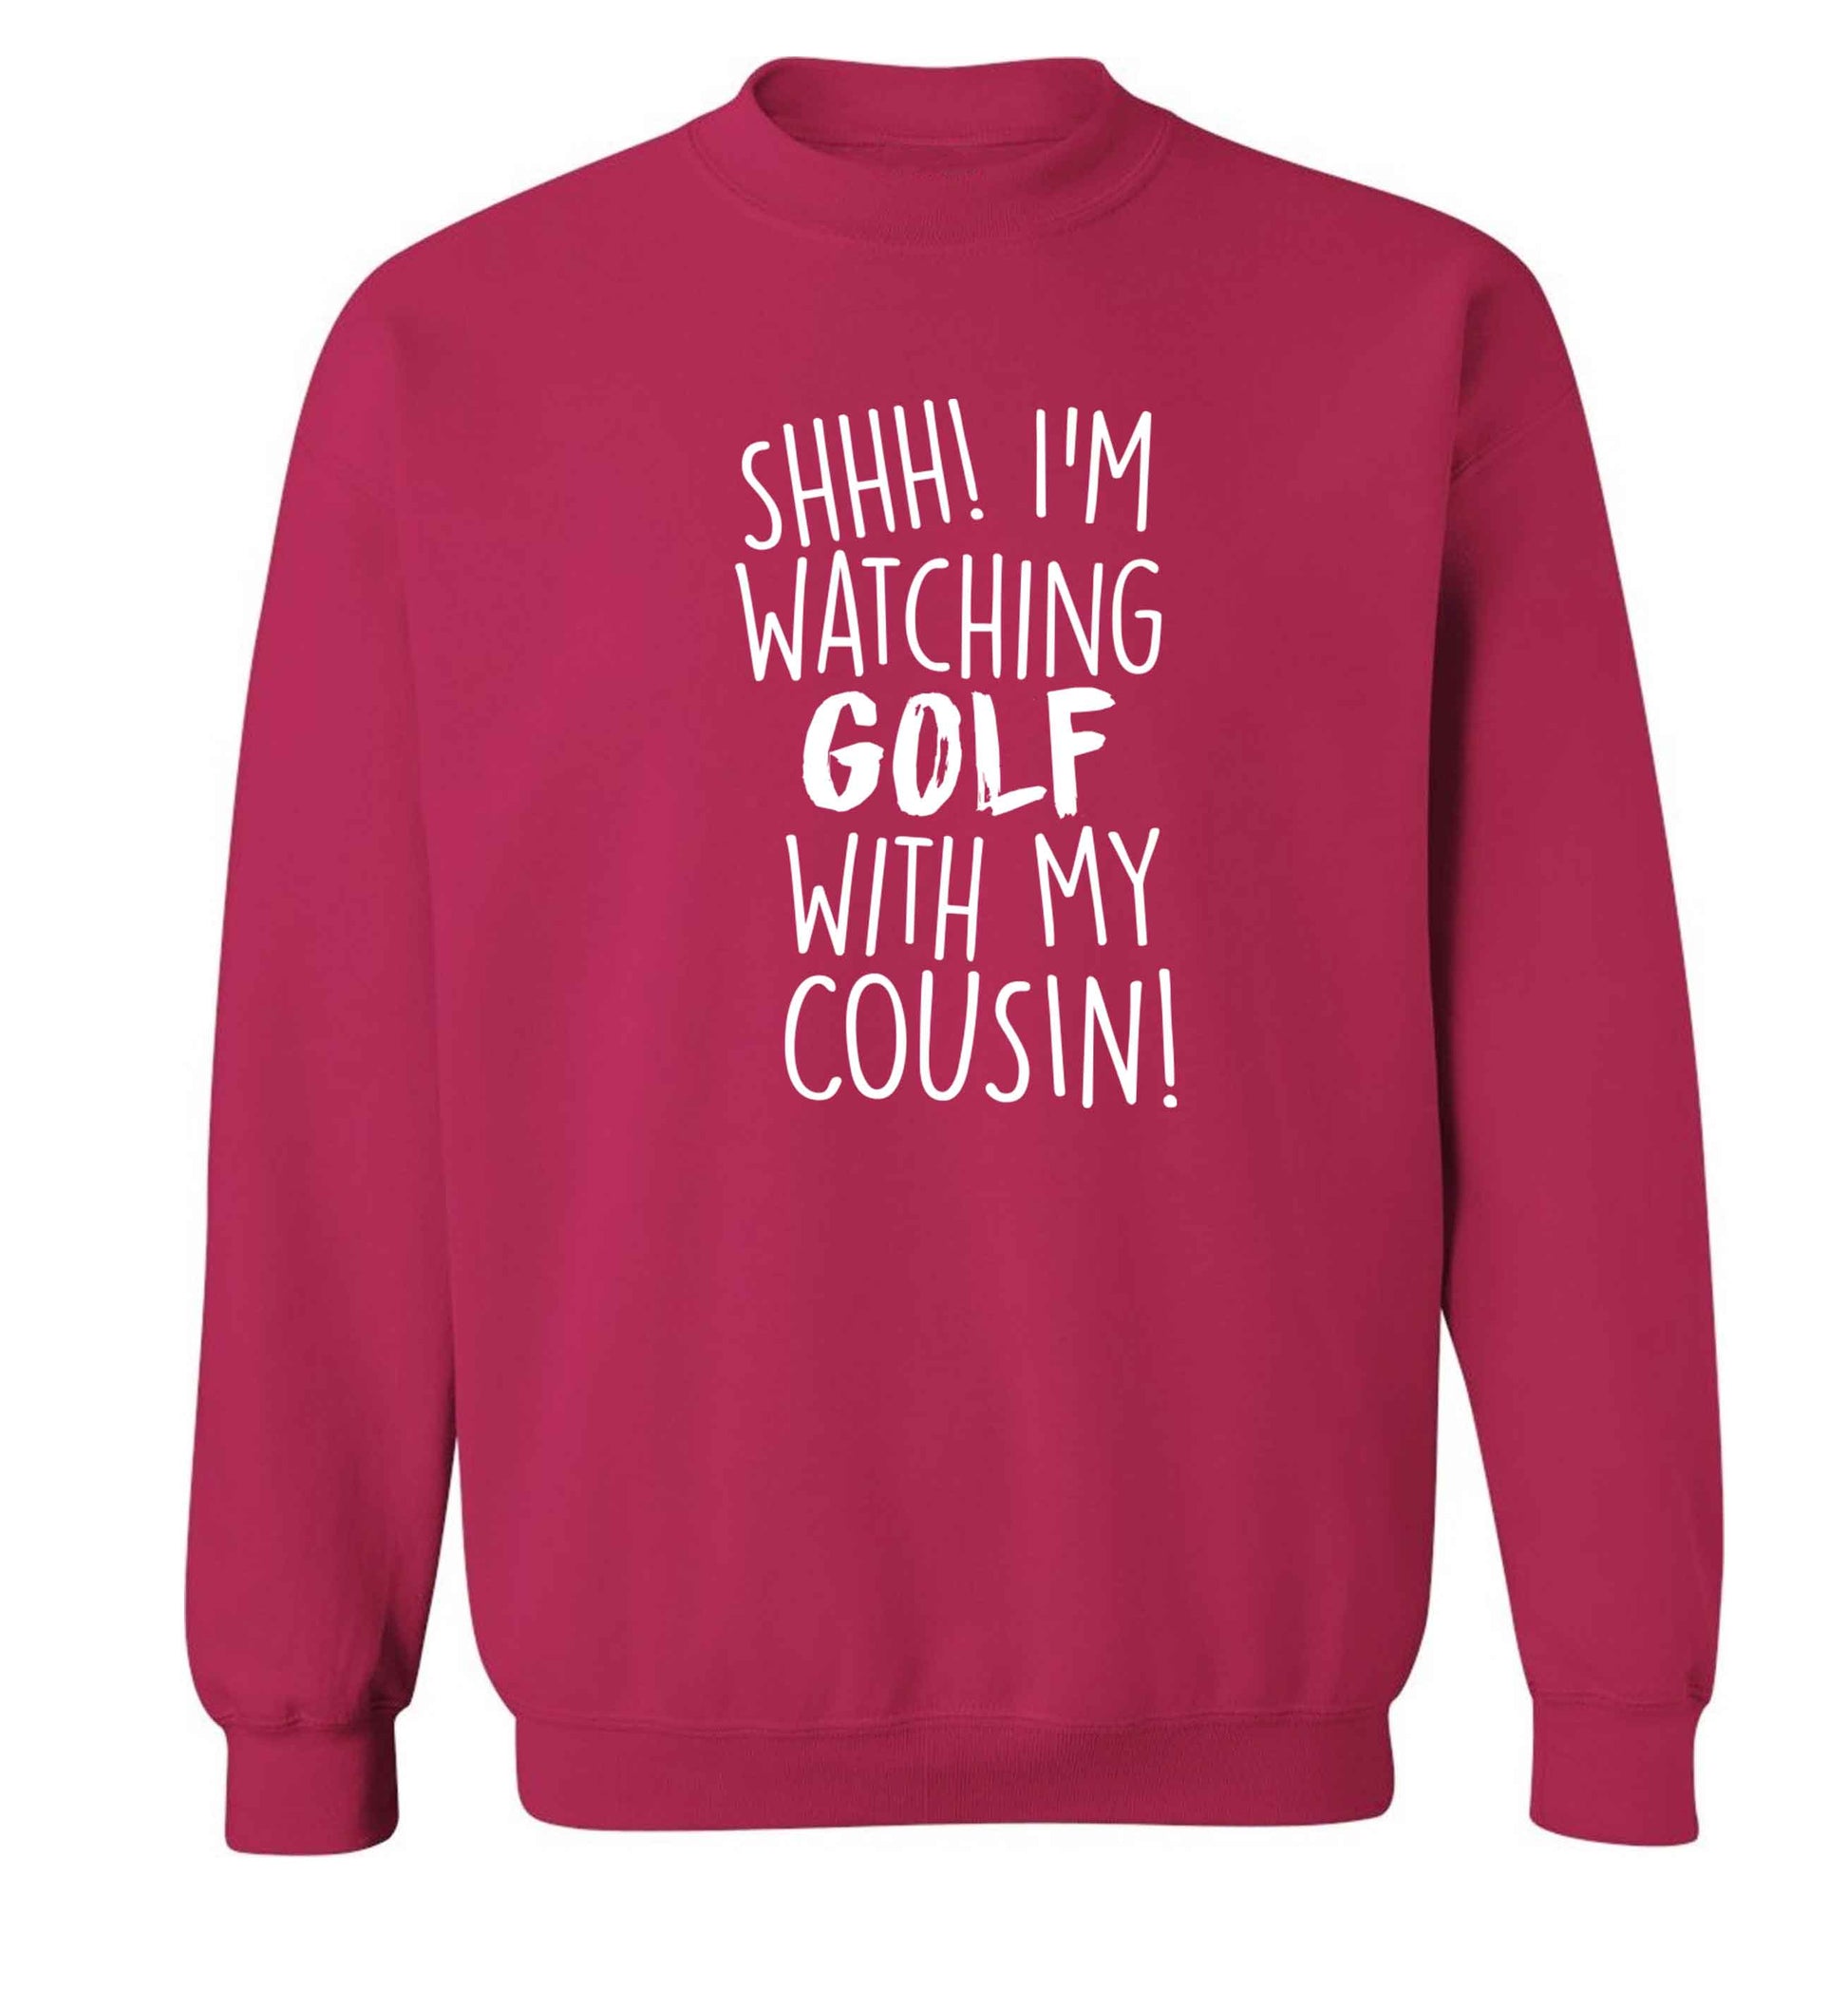 Shh I'm watching golf with my cousin Adult's unisex pink Sweater 2XL